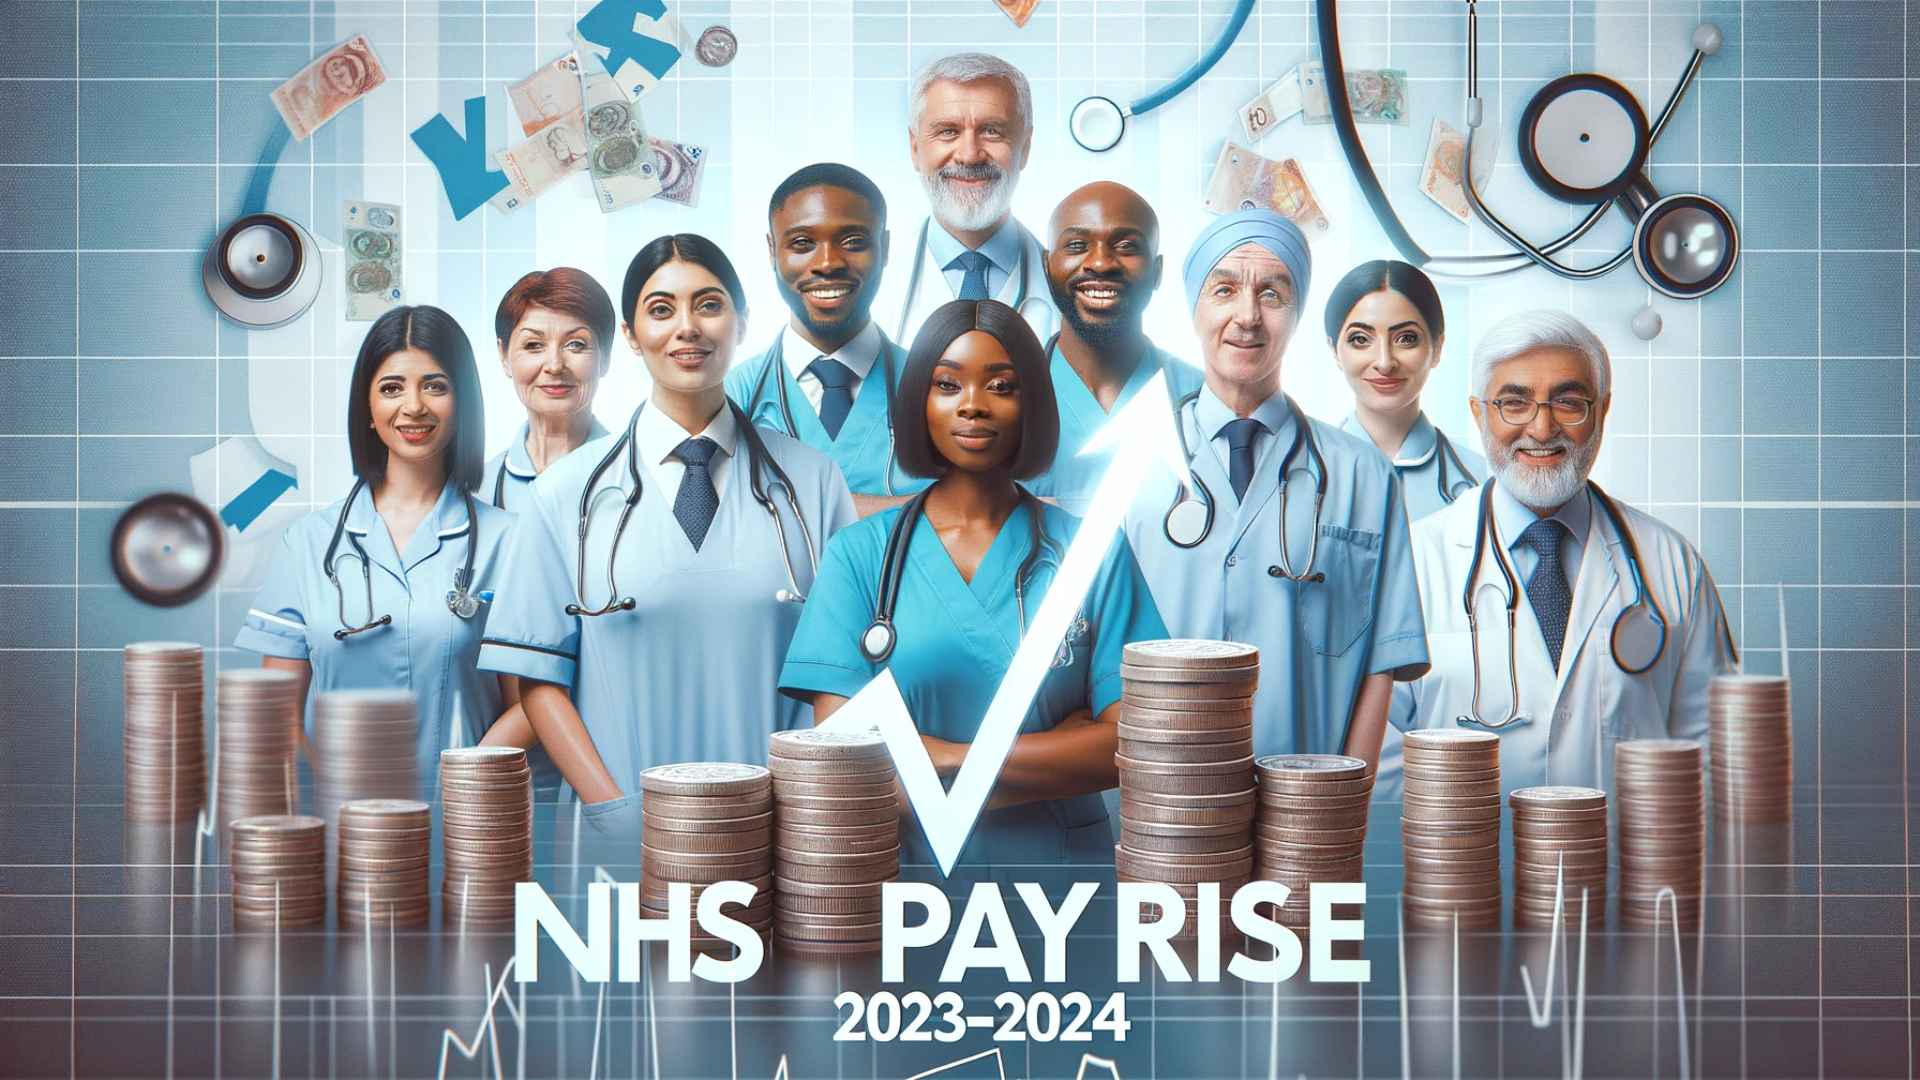 NHS Pay Rise 2023